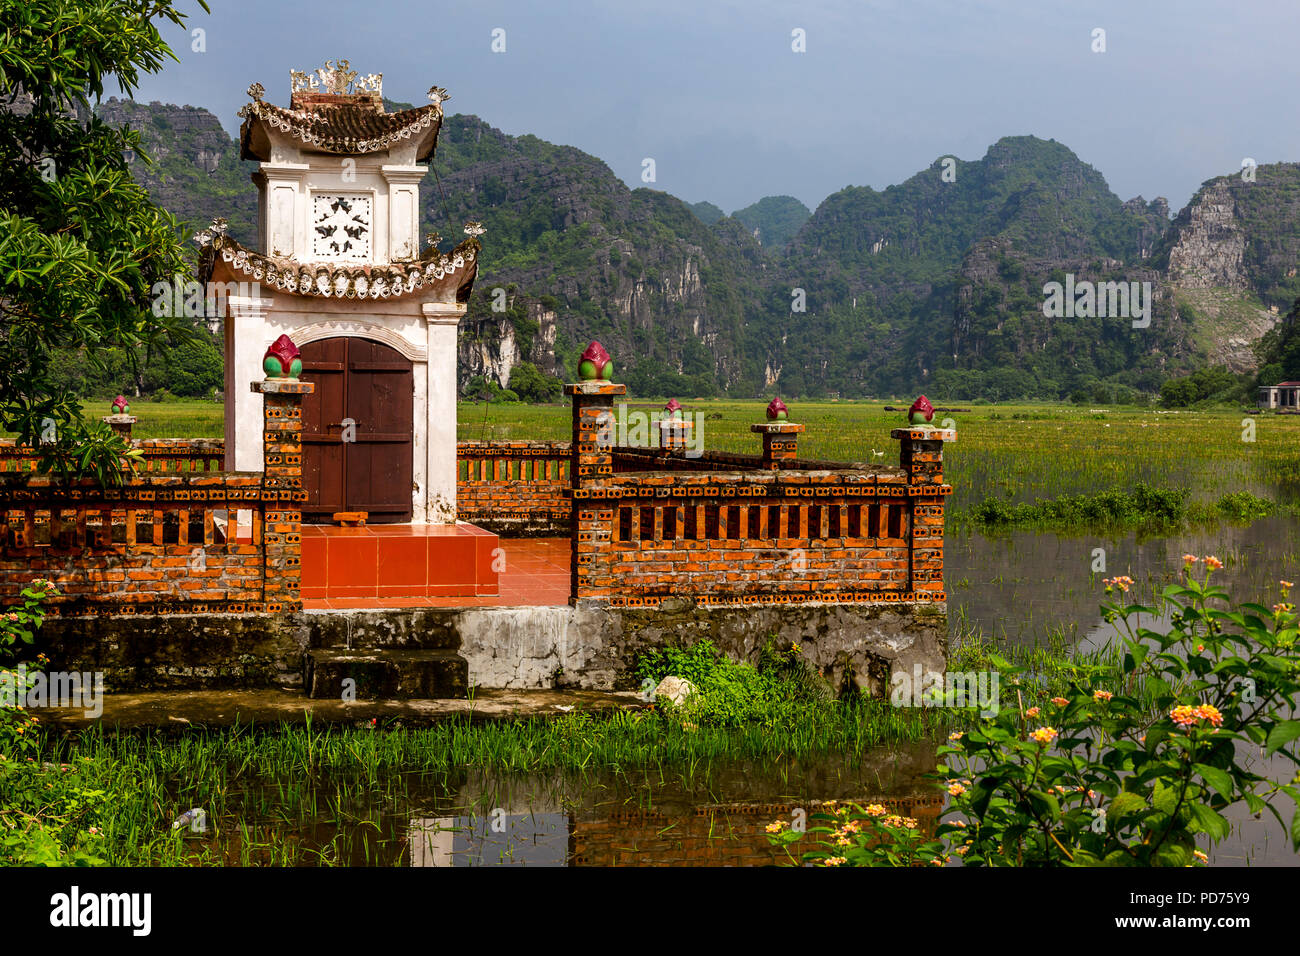 Pagoda in the field in Vietnam Ninh Binh Porvence. Mountians and rice fields are in the background. Stock Photo